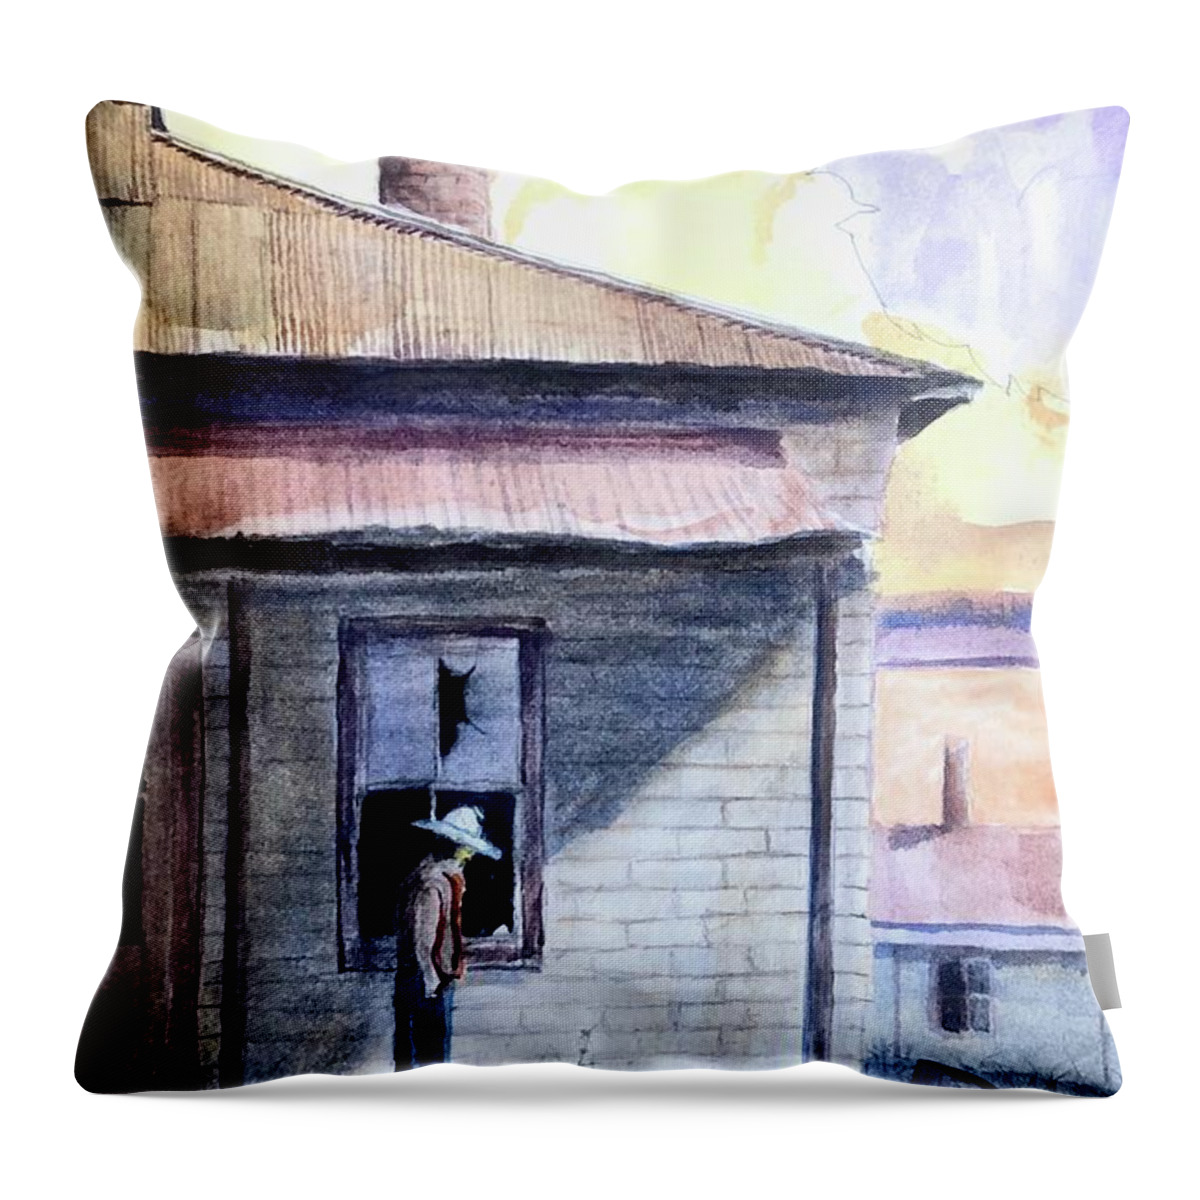 Hachita Throw Pillow featuring the painting Homeless In Hachita by John Glass